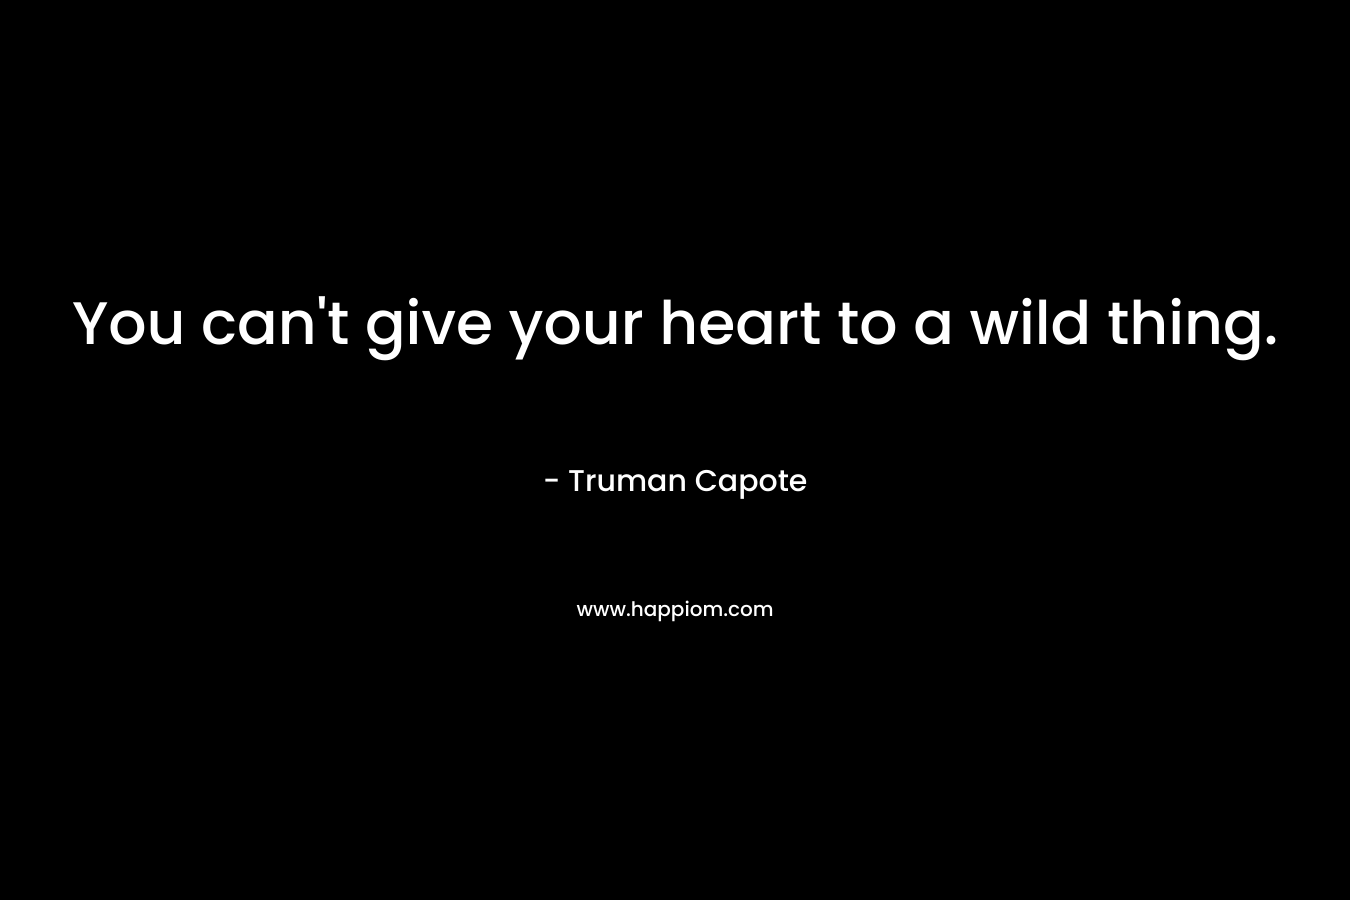 You can’t give your heart to a wild thing. – Truman Capote